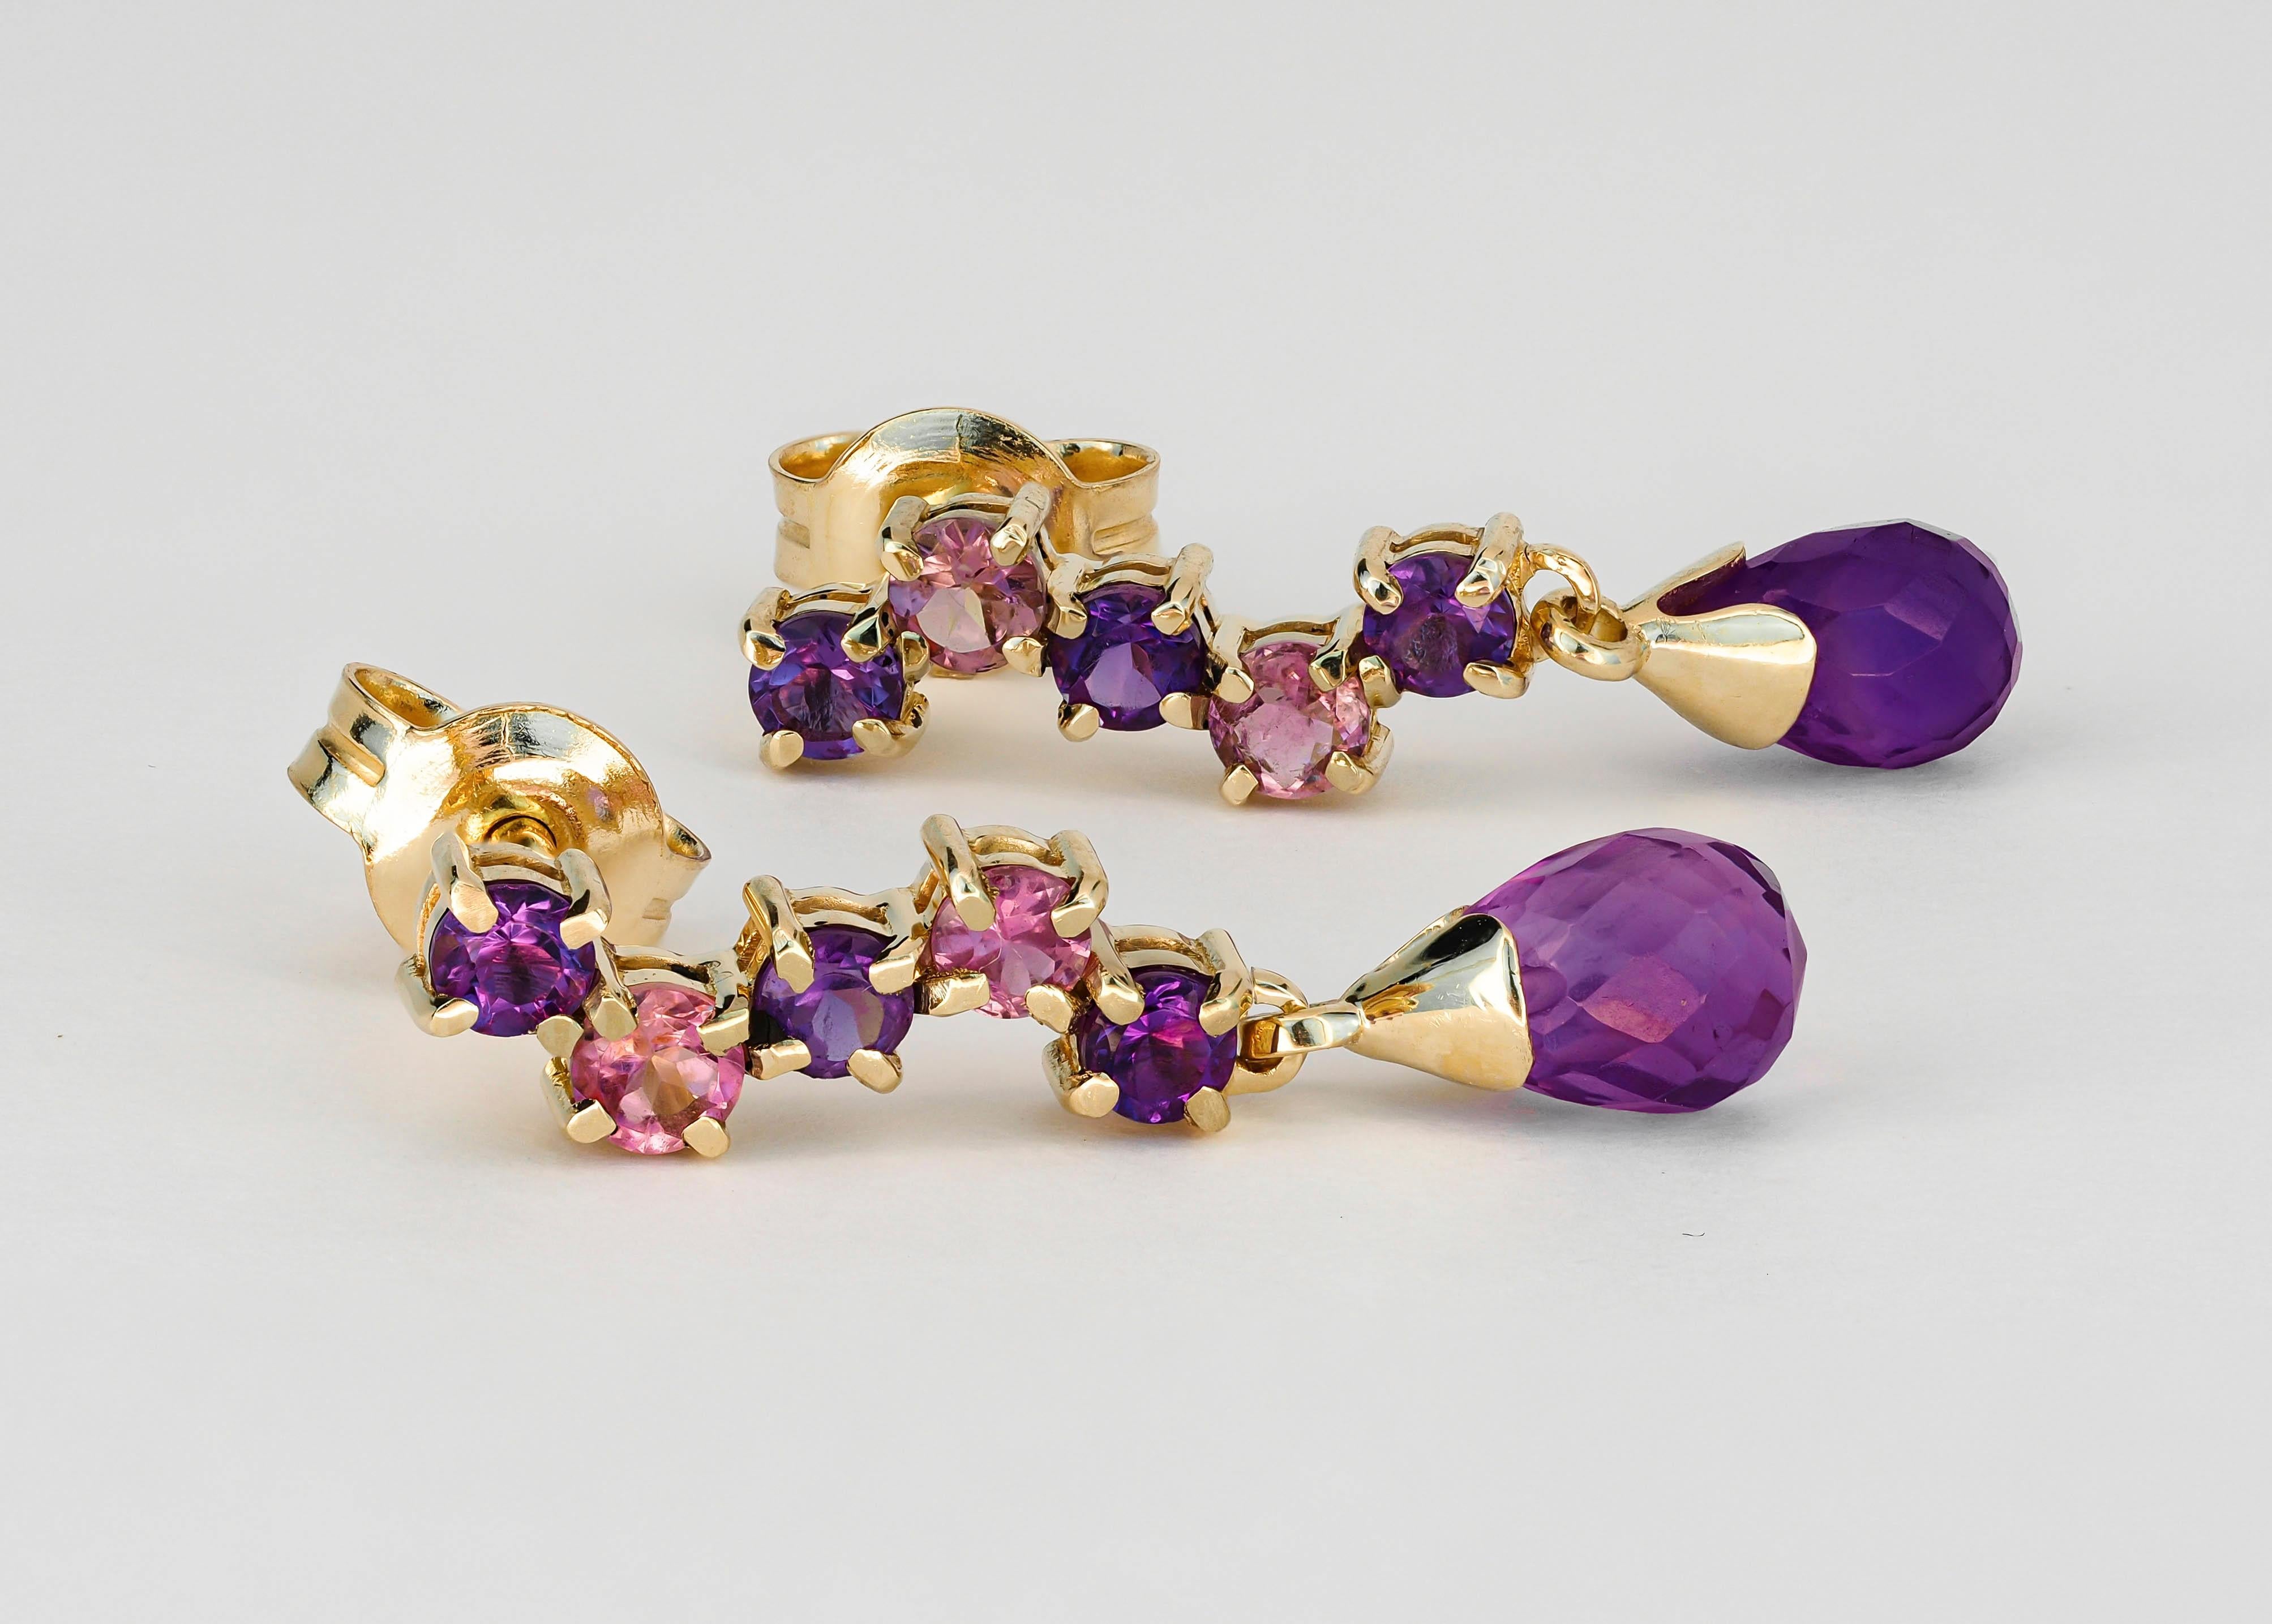 Briolette Cut 14k gold earrings with amethysts and sapphires